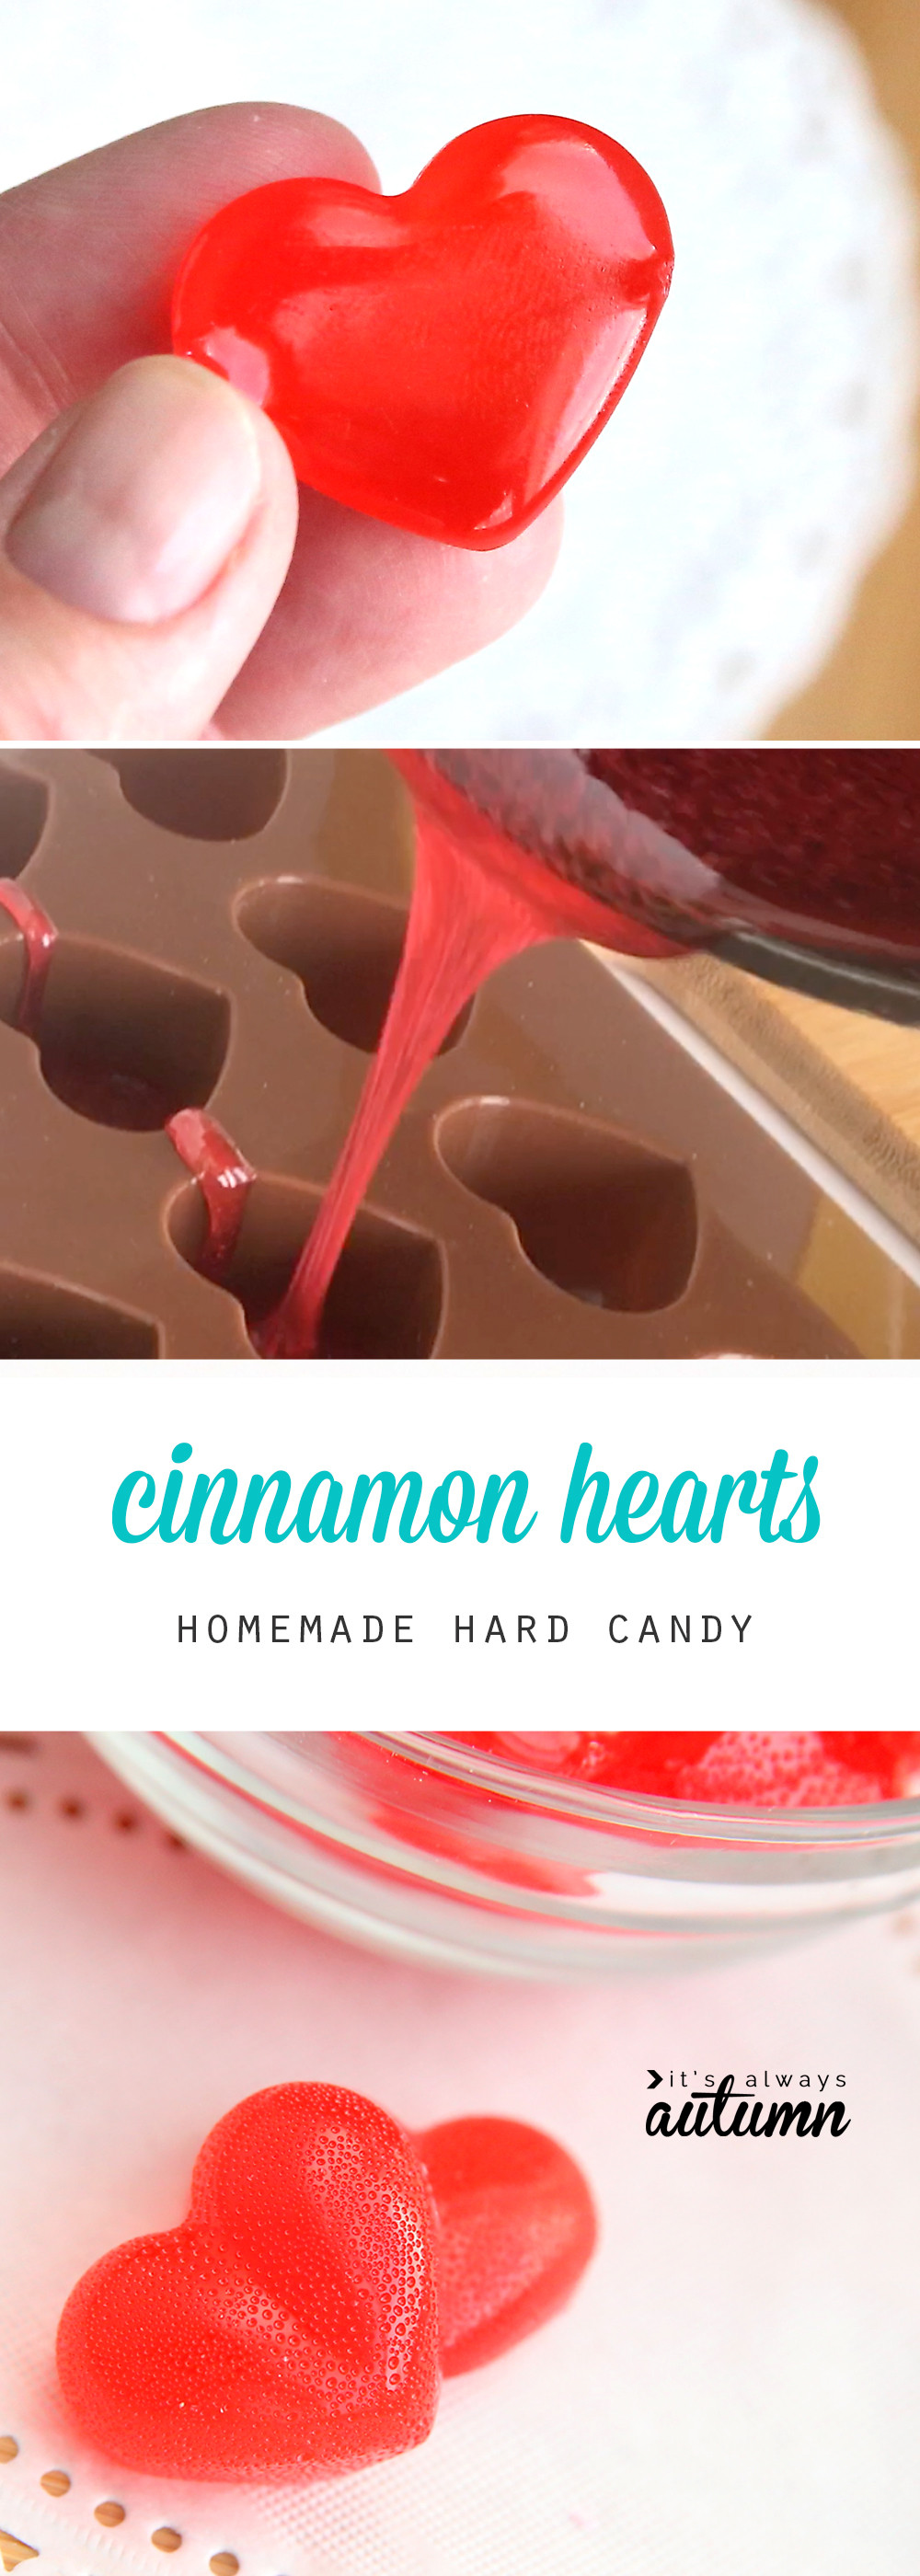 Cinnamon Christmas Candy
 cinnamon hearts hard candy for Valentine s Day It s